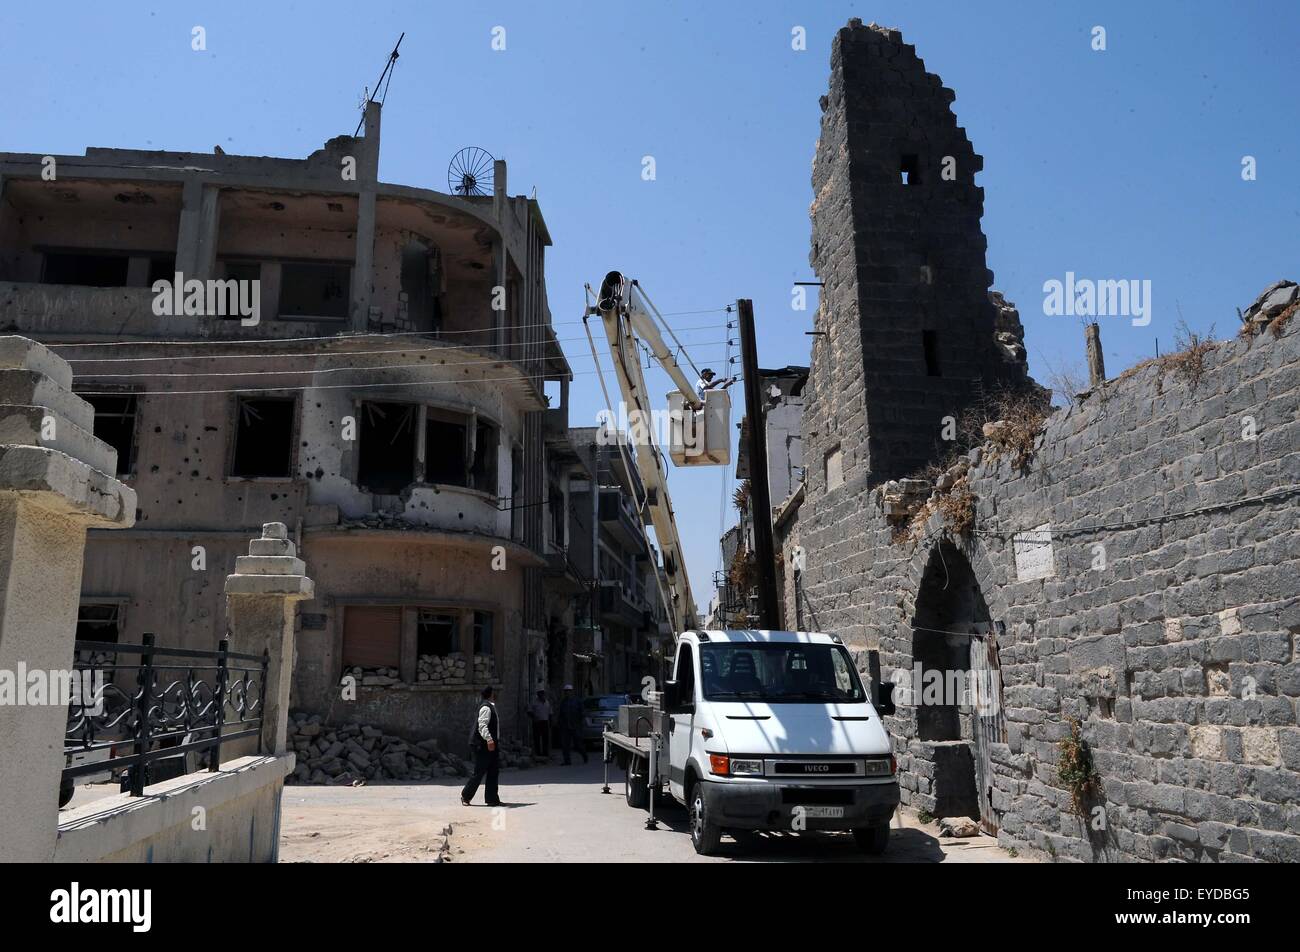 Homs, Syria. 27th July, 2015. A Syrian works on destroyed street lamps in the old city of Homs, central Syria, July 27, 2015. © Zhang Naijie/Xinhua/Alamy Live News Stock Photo